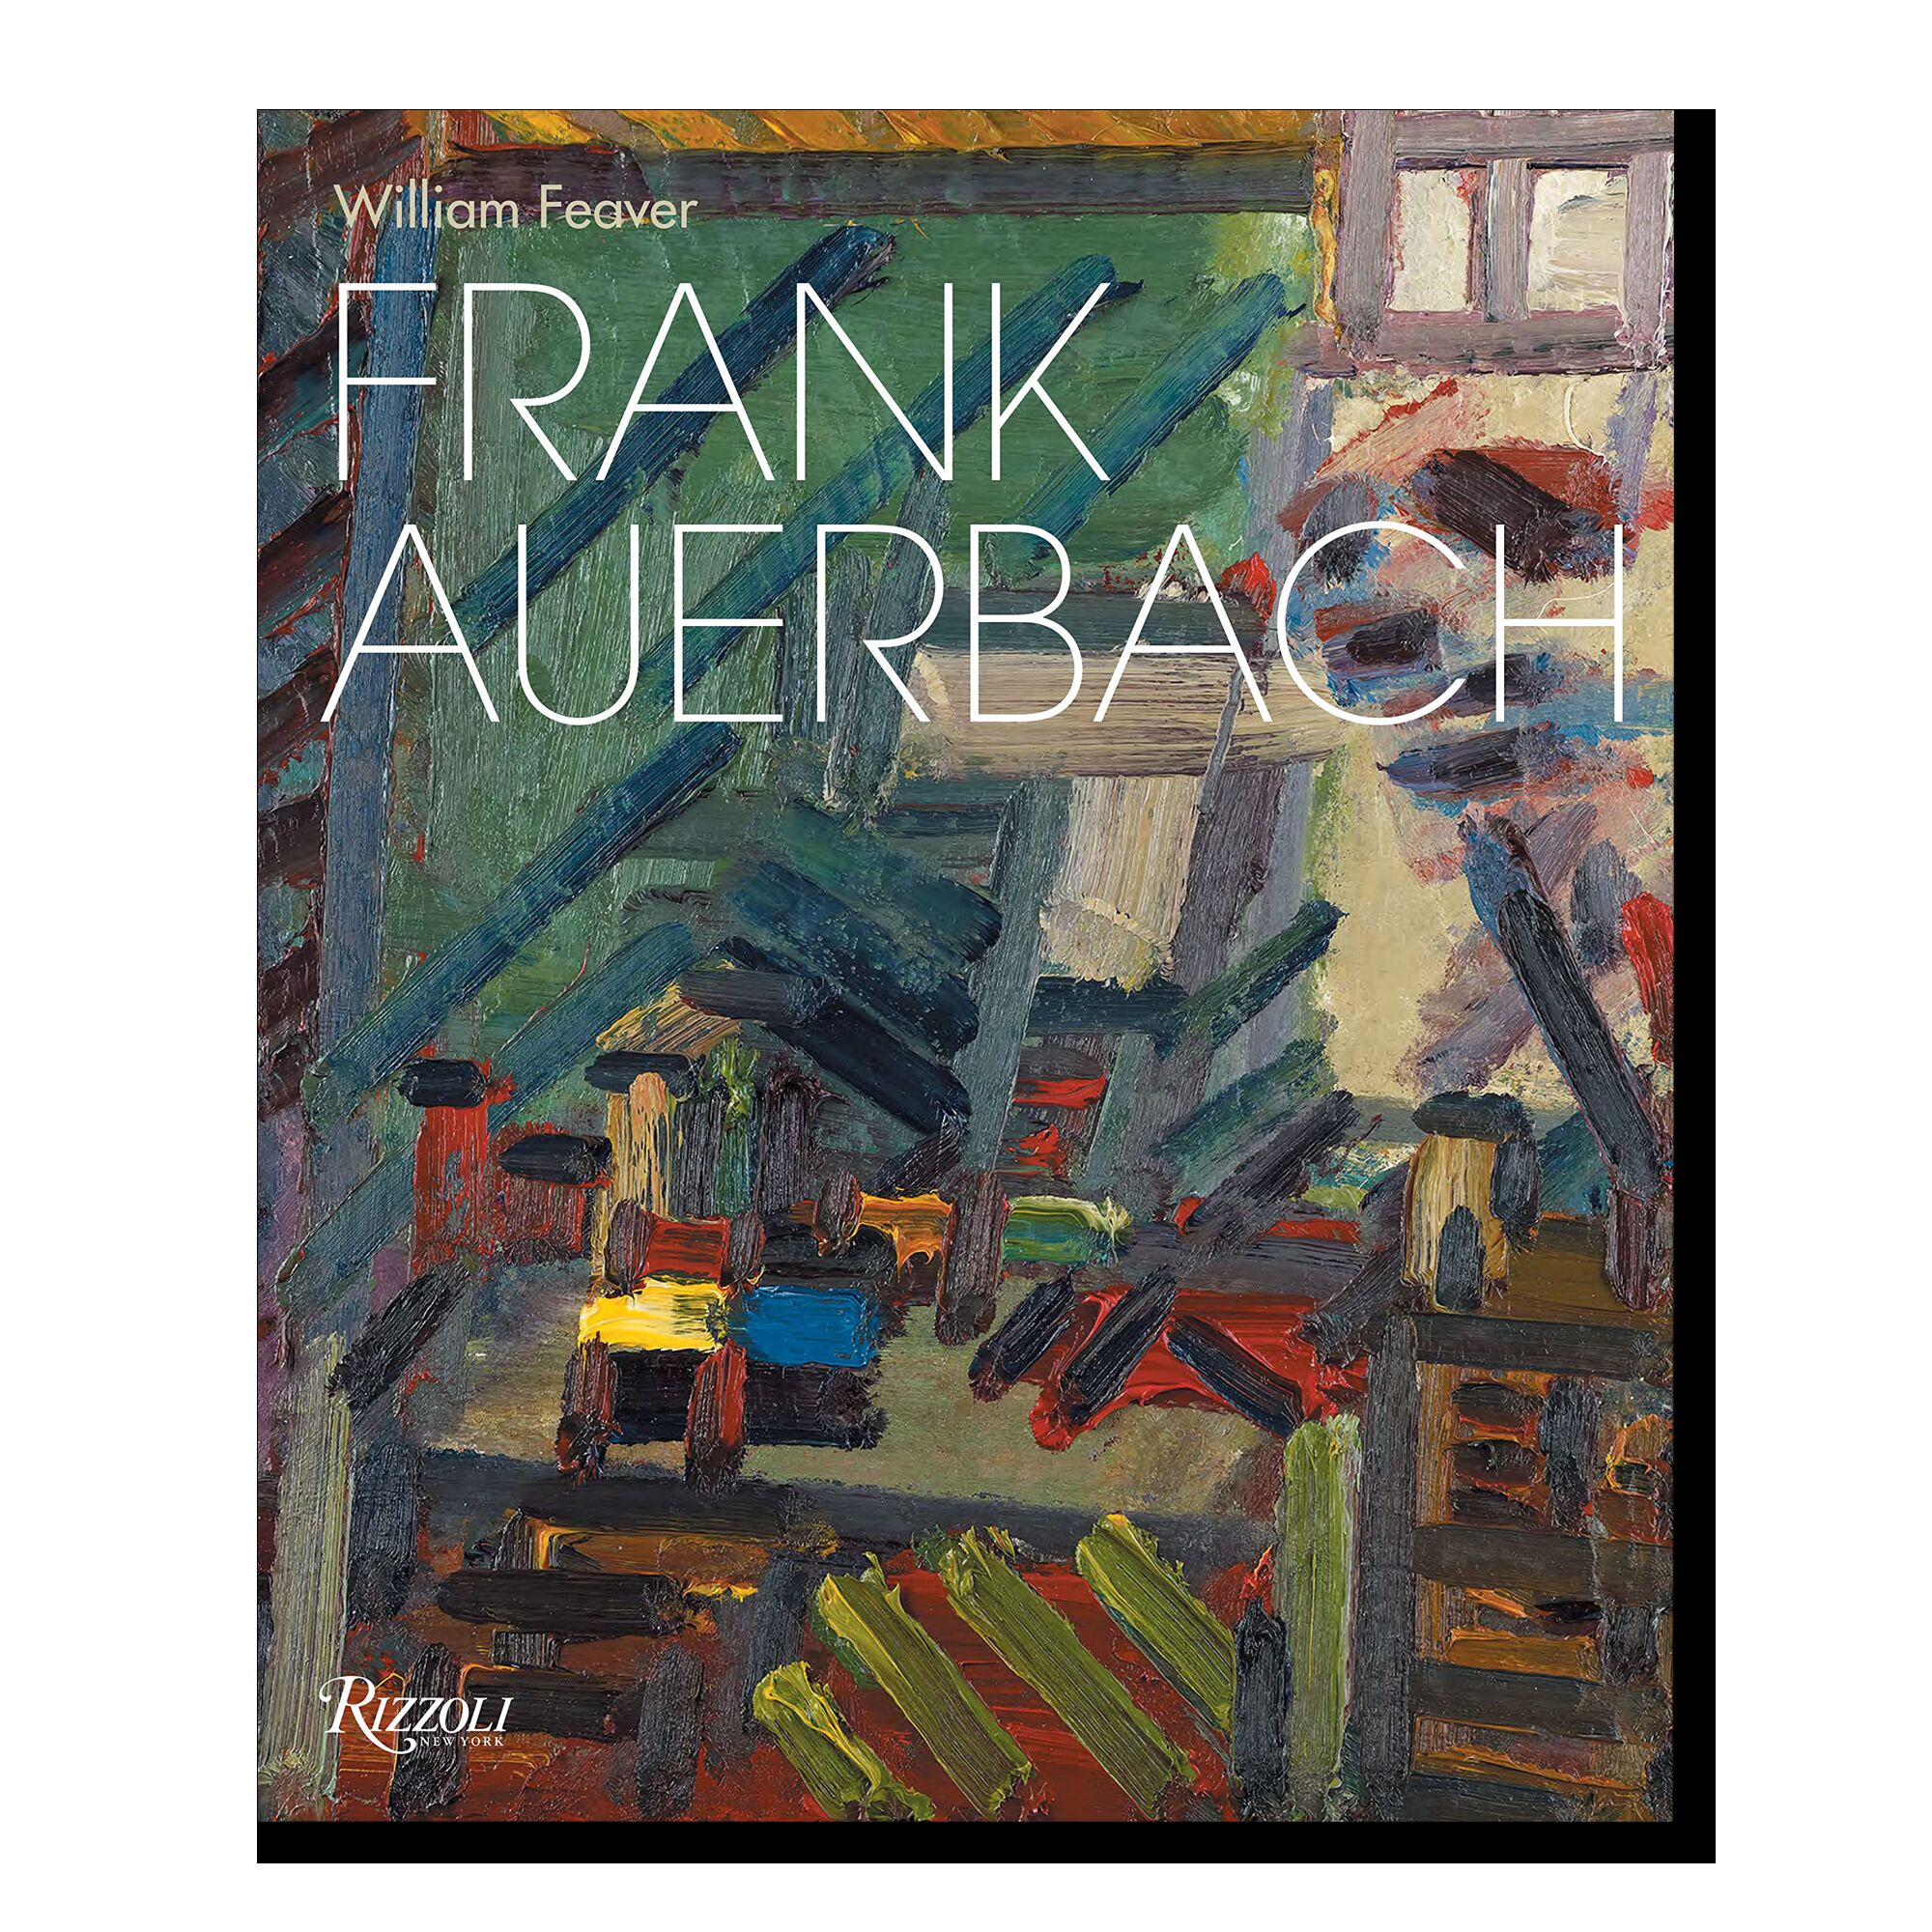 Frank Auerbach: Revised and Expanded Edition